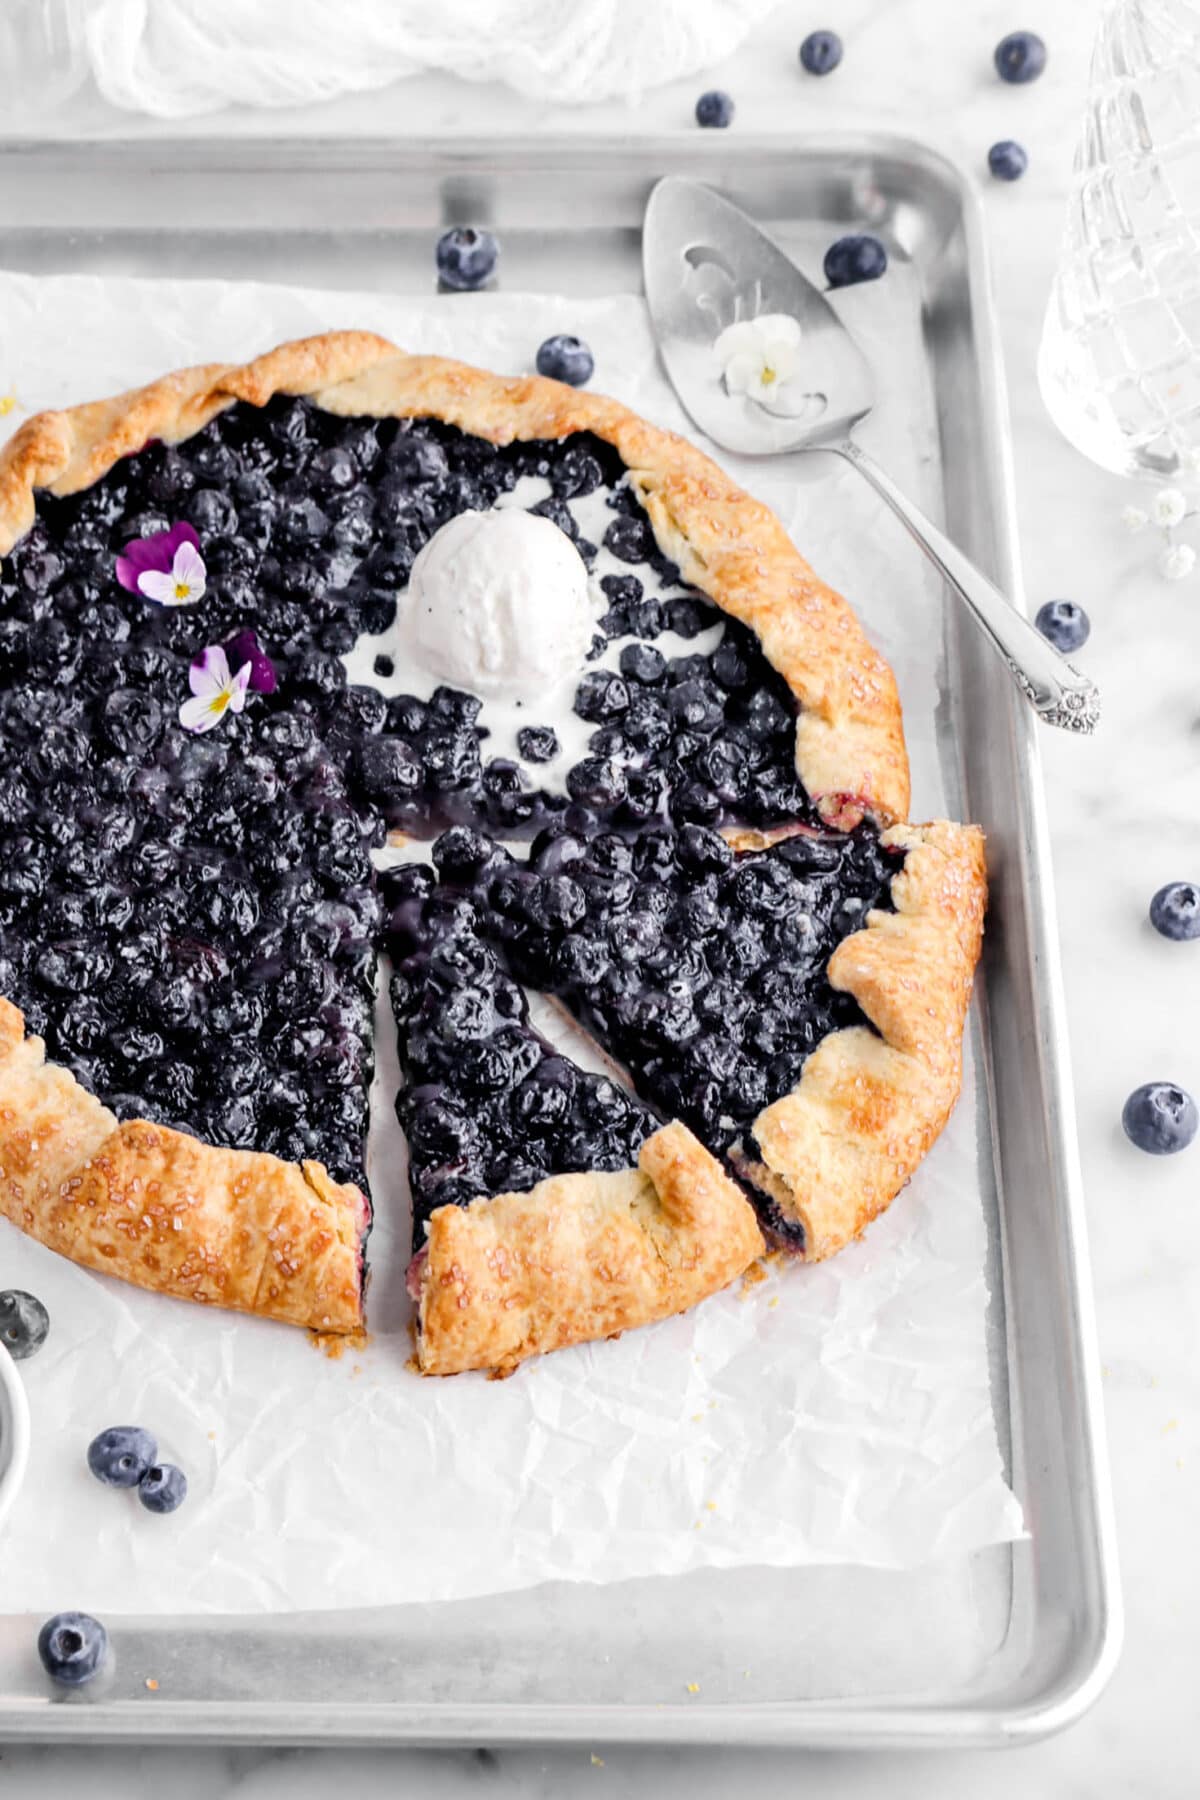 cropped close up of blueberry galette on lined sheet pan with two slices cut into it with a melting scoop of ice cream and two purple and white violas on top.